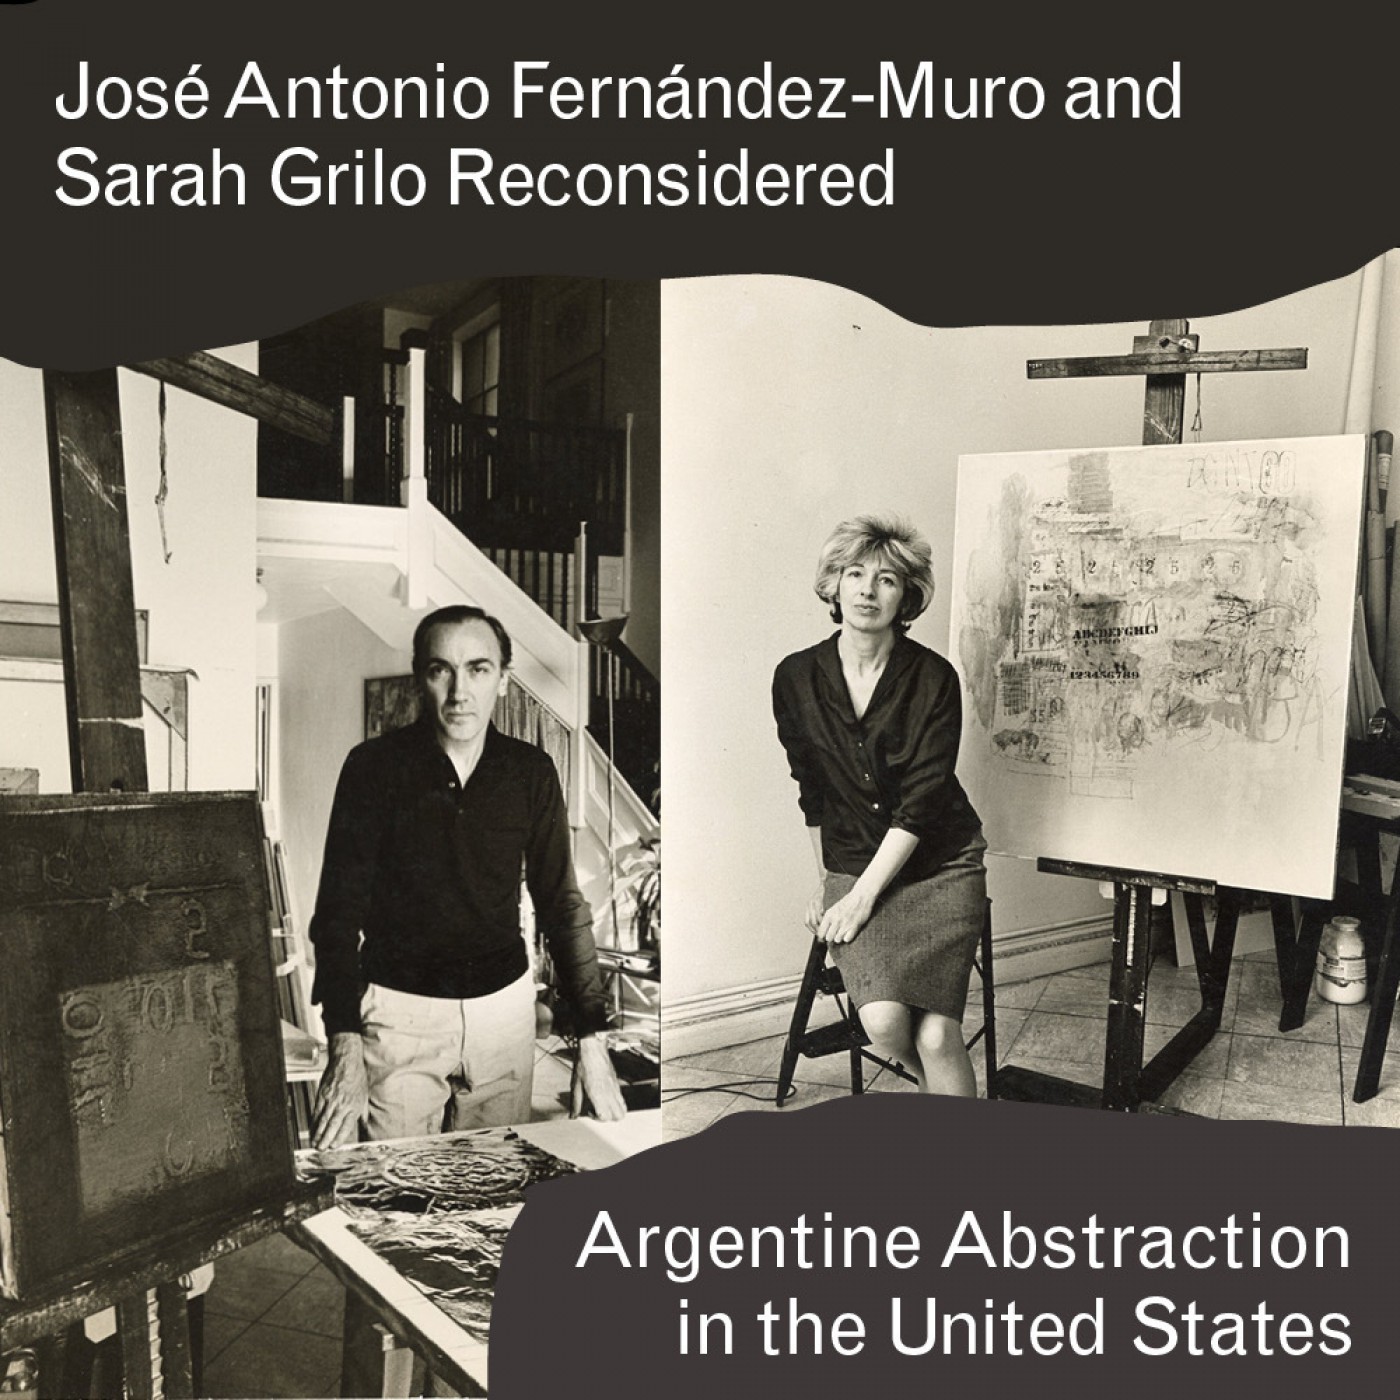 Poster for event depicting a portrait of José Antonio Fernández-Muro by his painting and a portrait of Sarah Grilo by her painting.